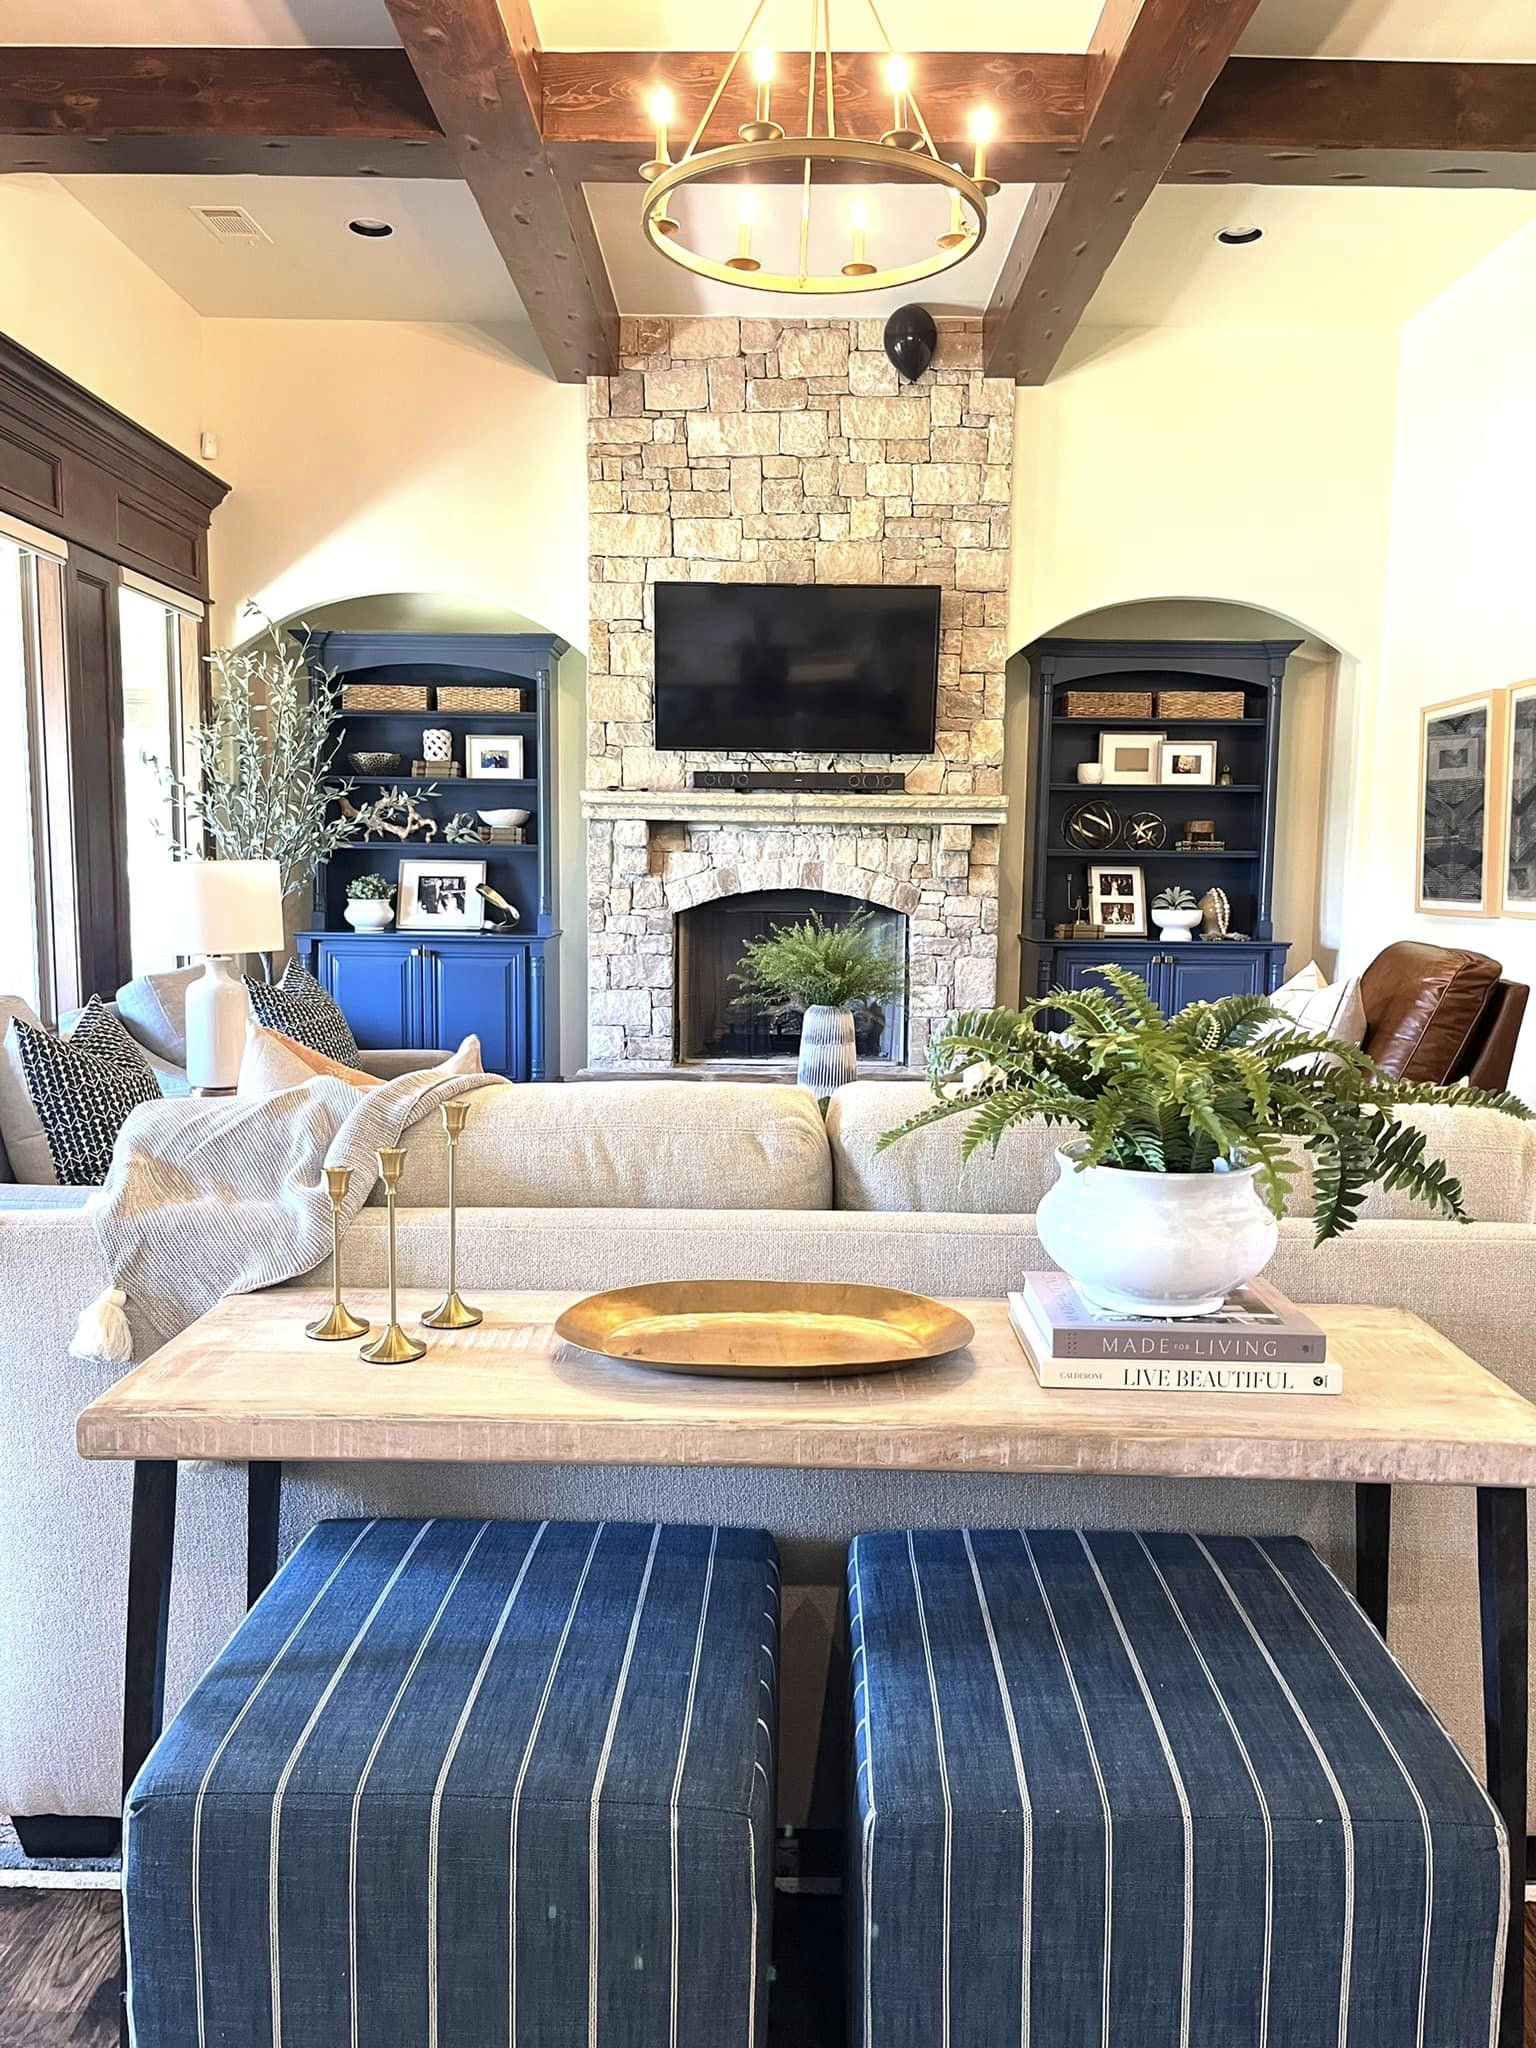 10 Kelly Metcalf Sharp A Interior Design and staging